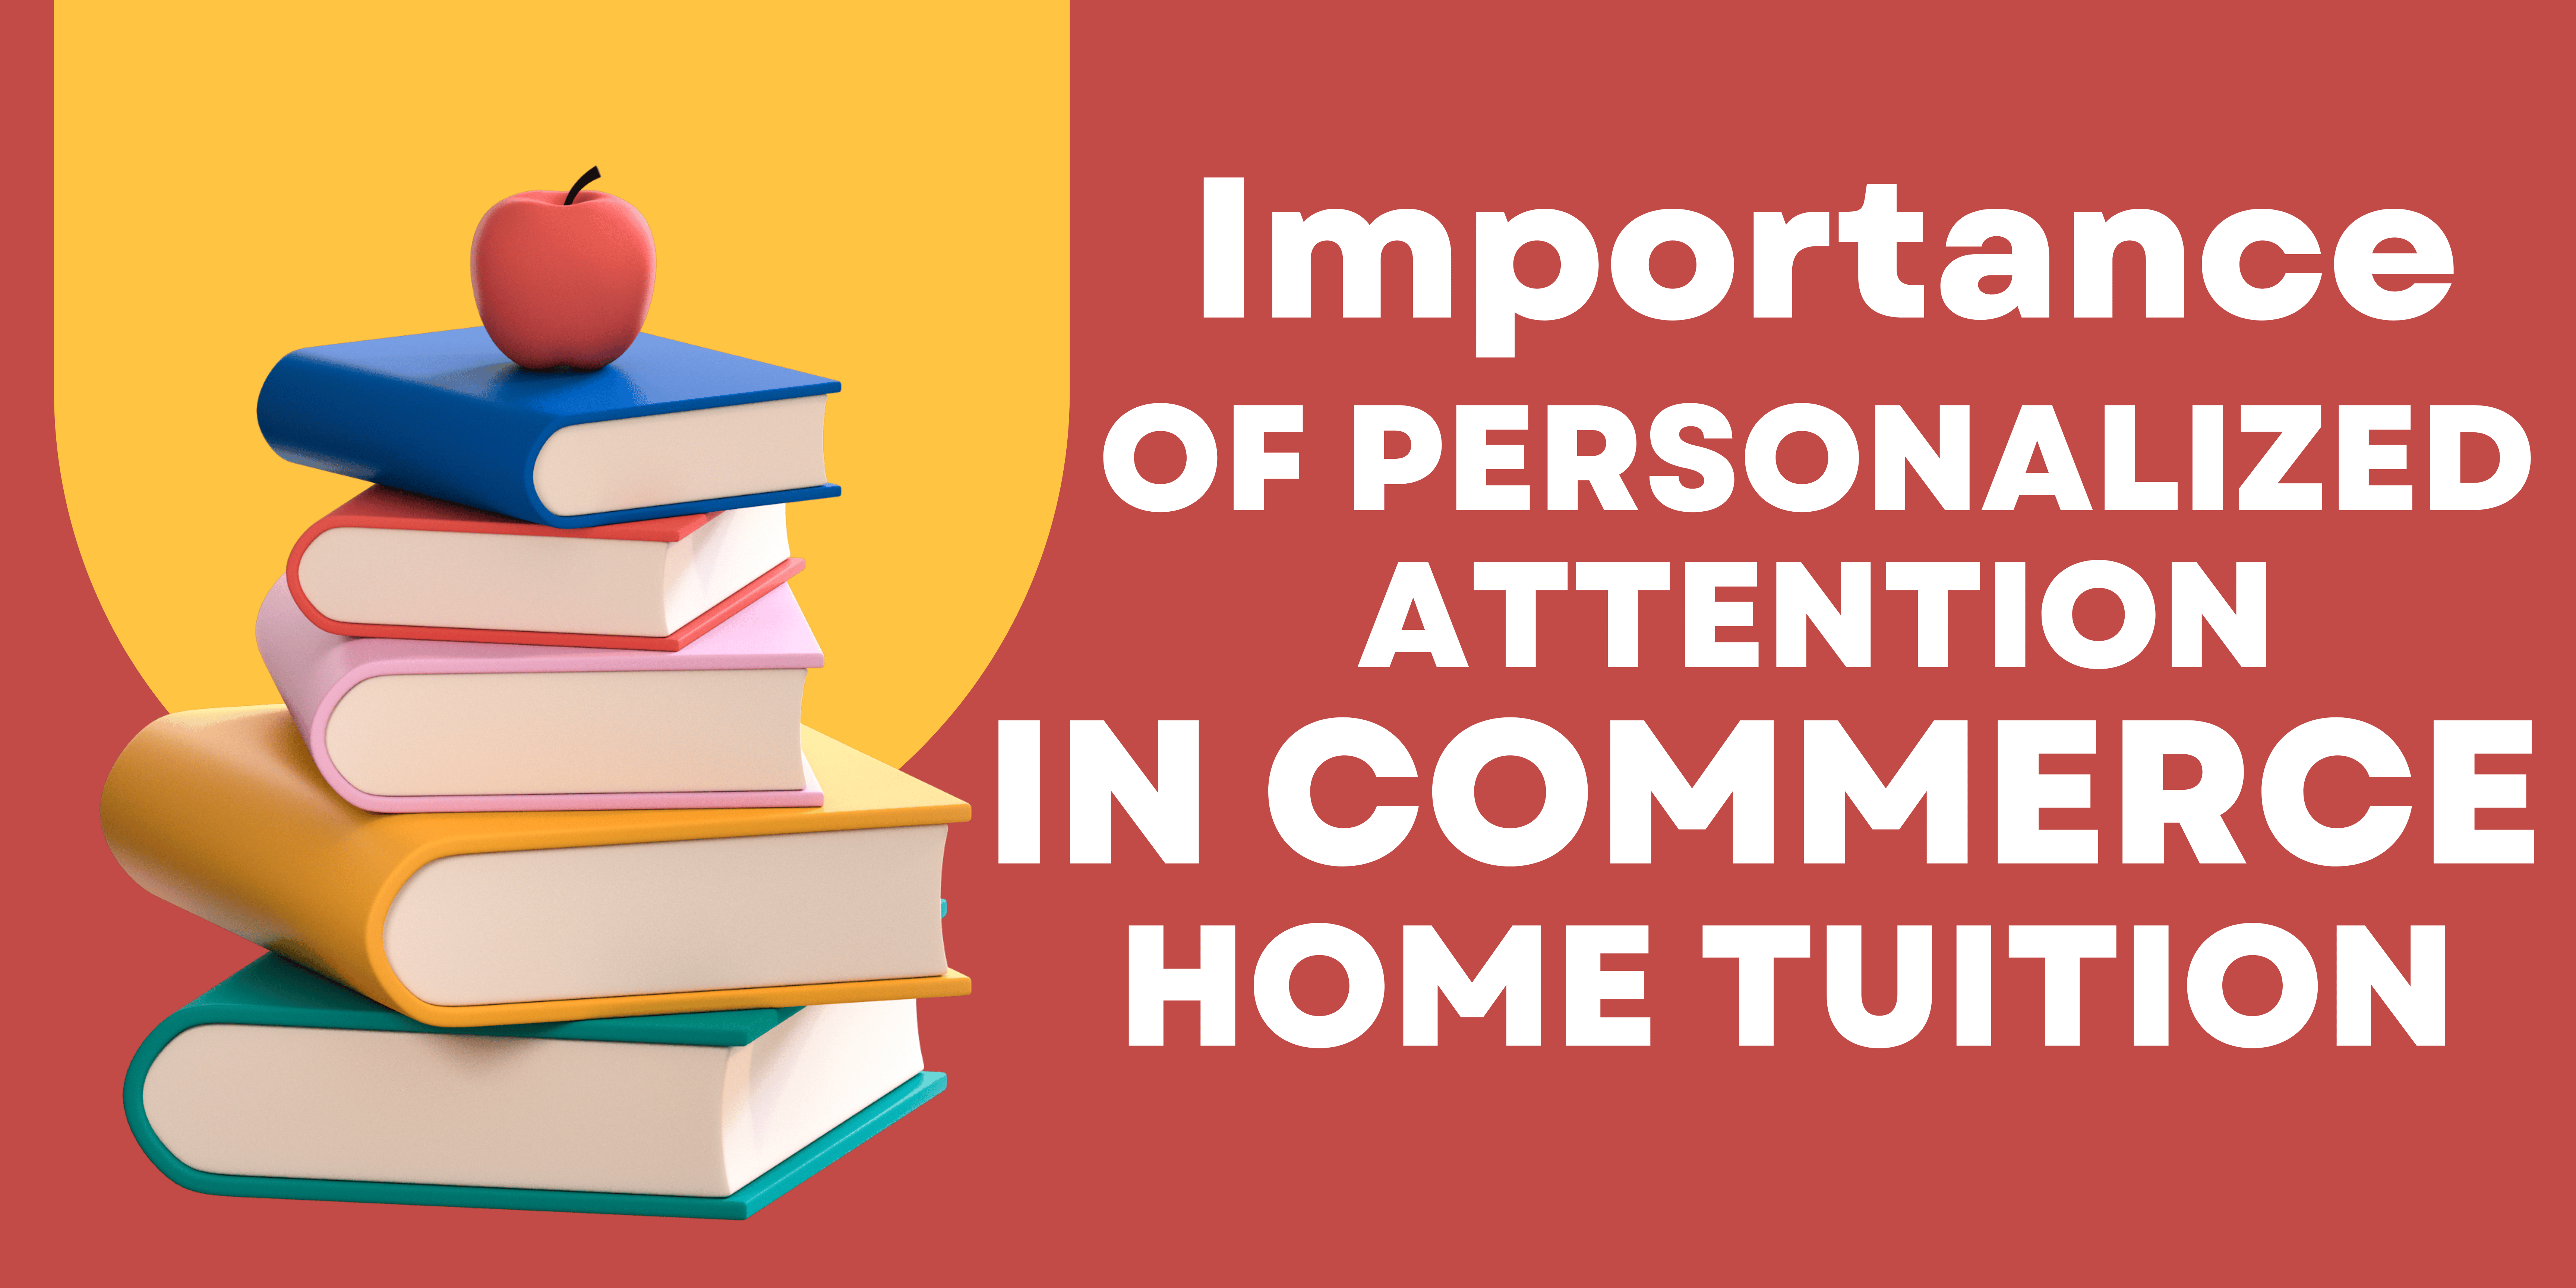 Importance of Personalized Attention in Commerce home tuition